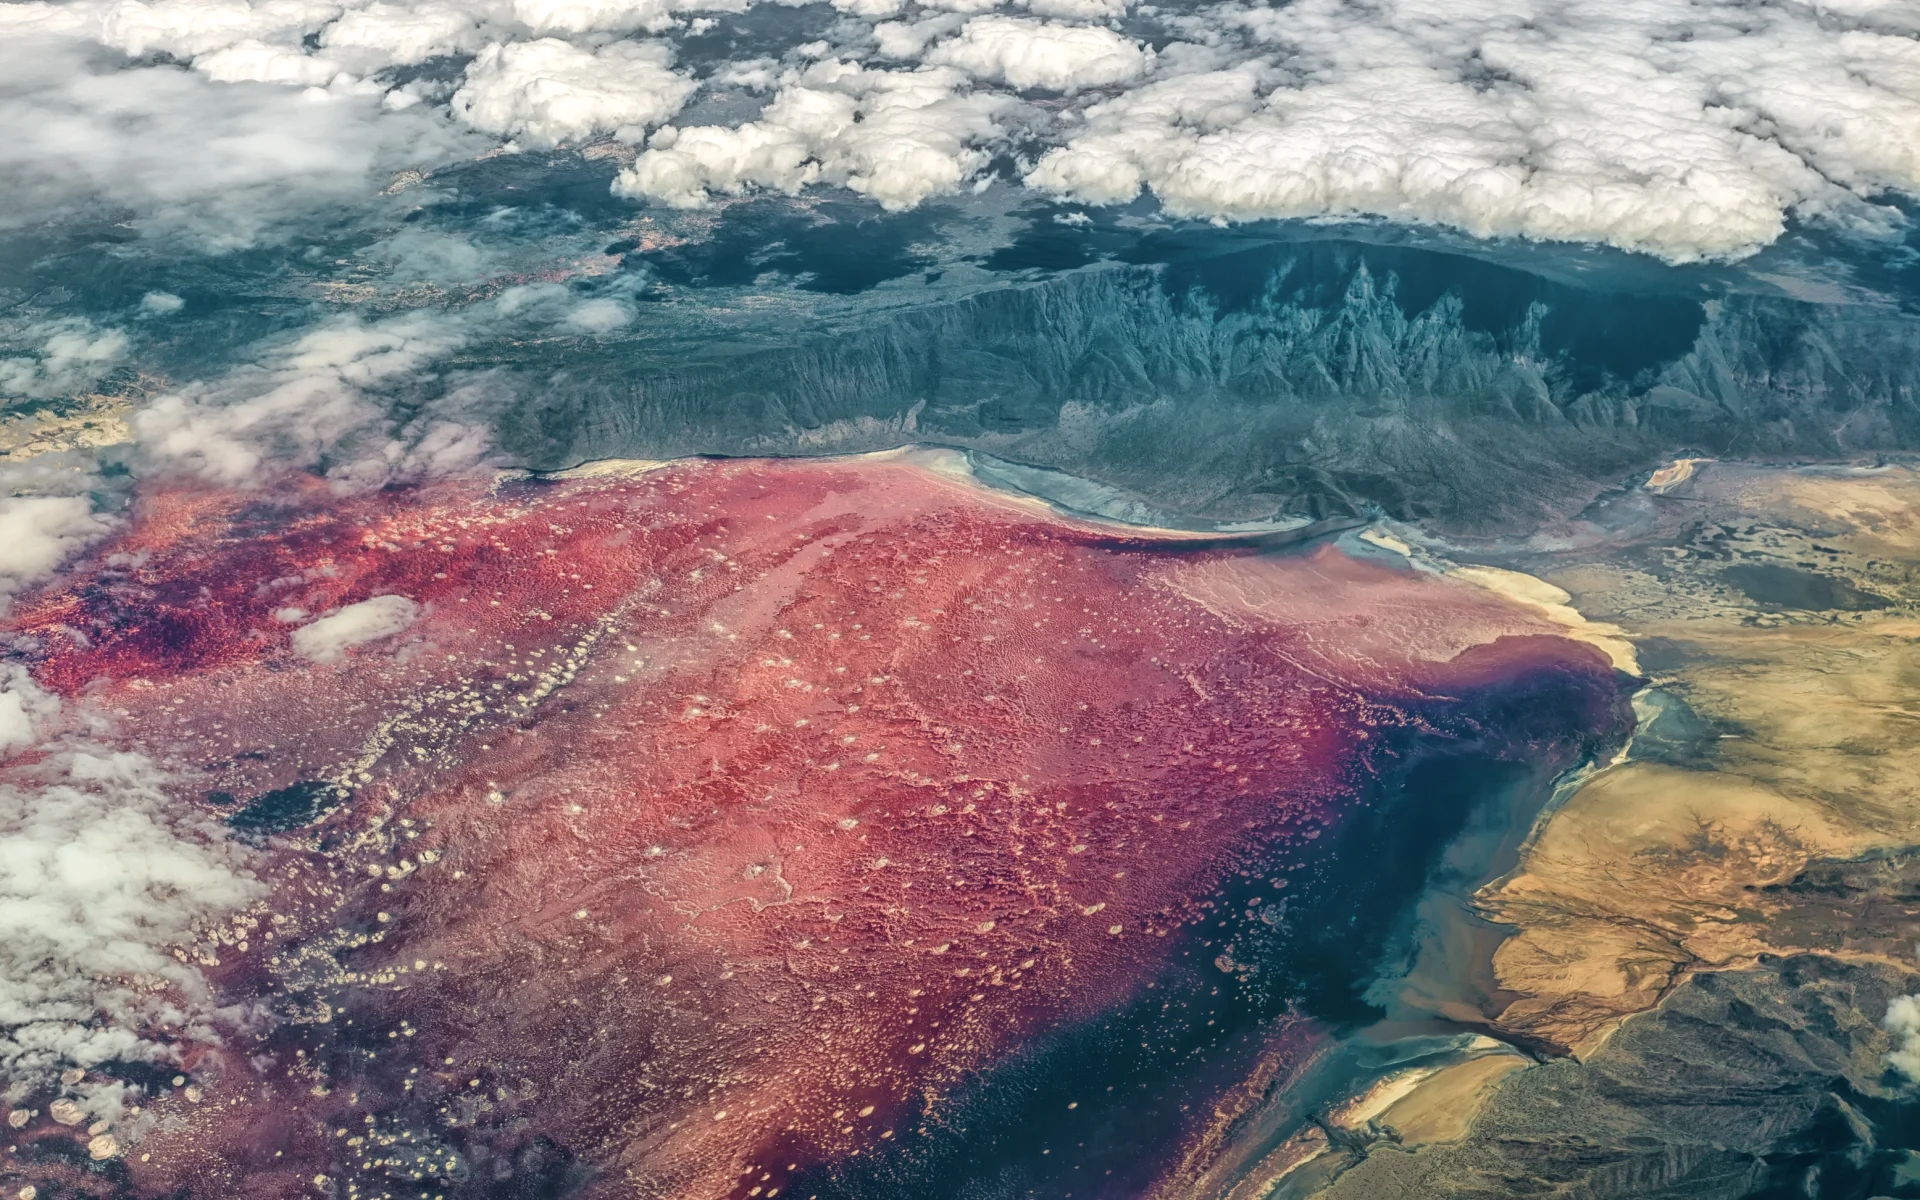 Lake Natron sparkles in a deep red, contrasting its rocky and cliffy banks.